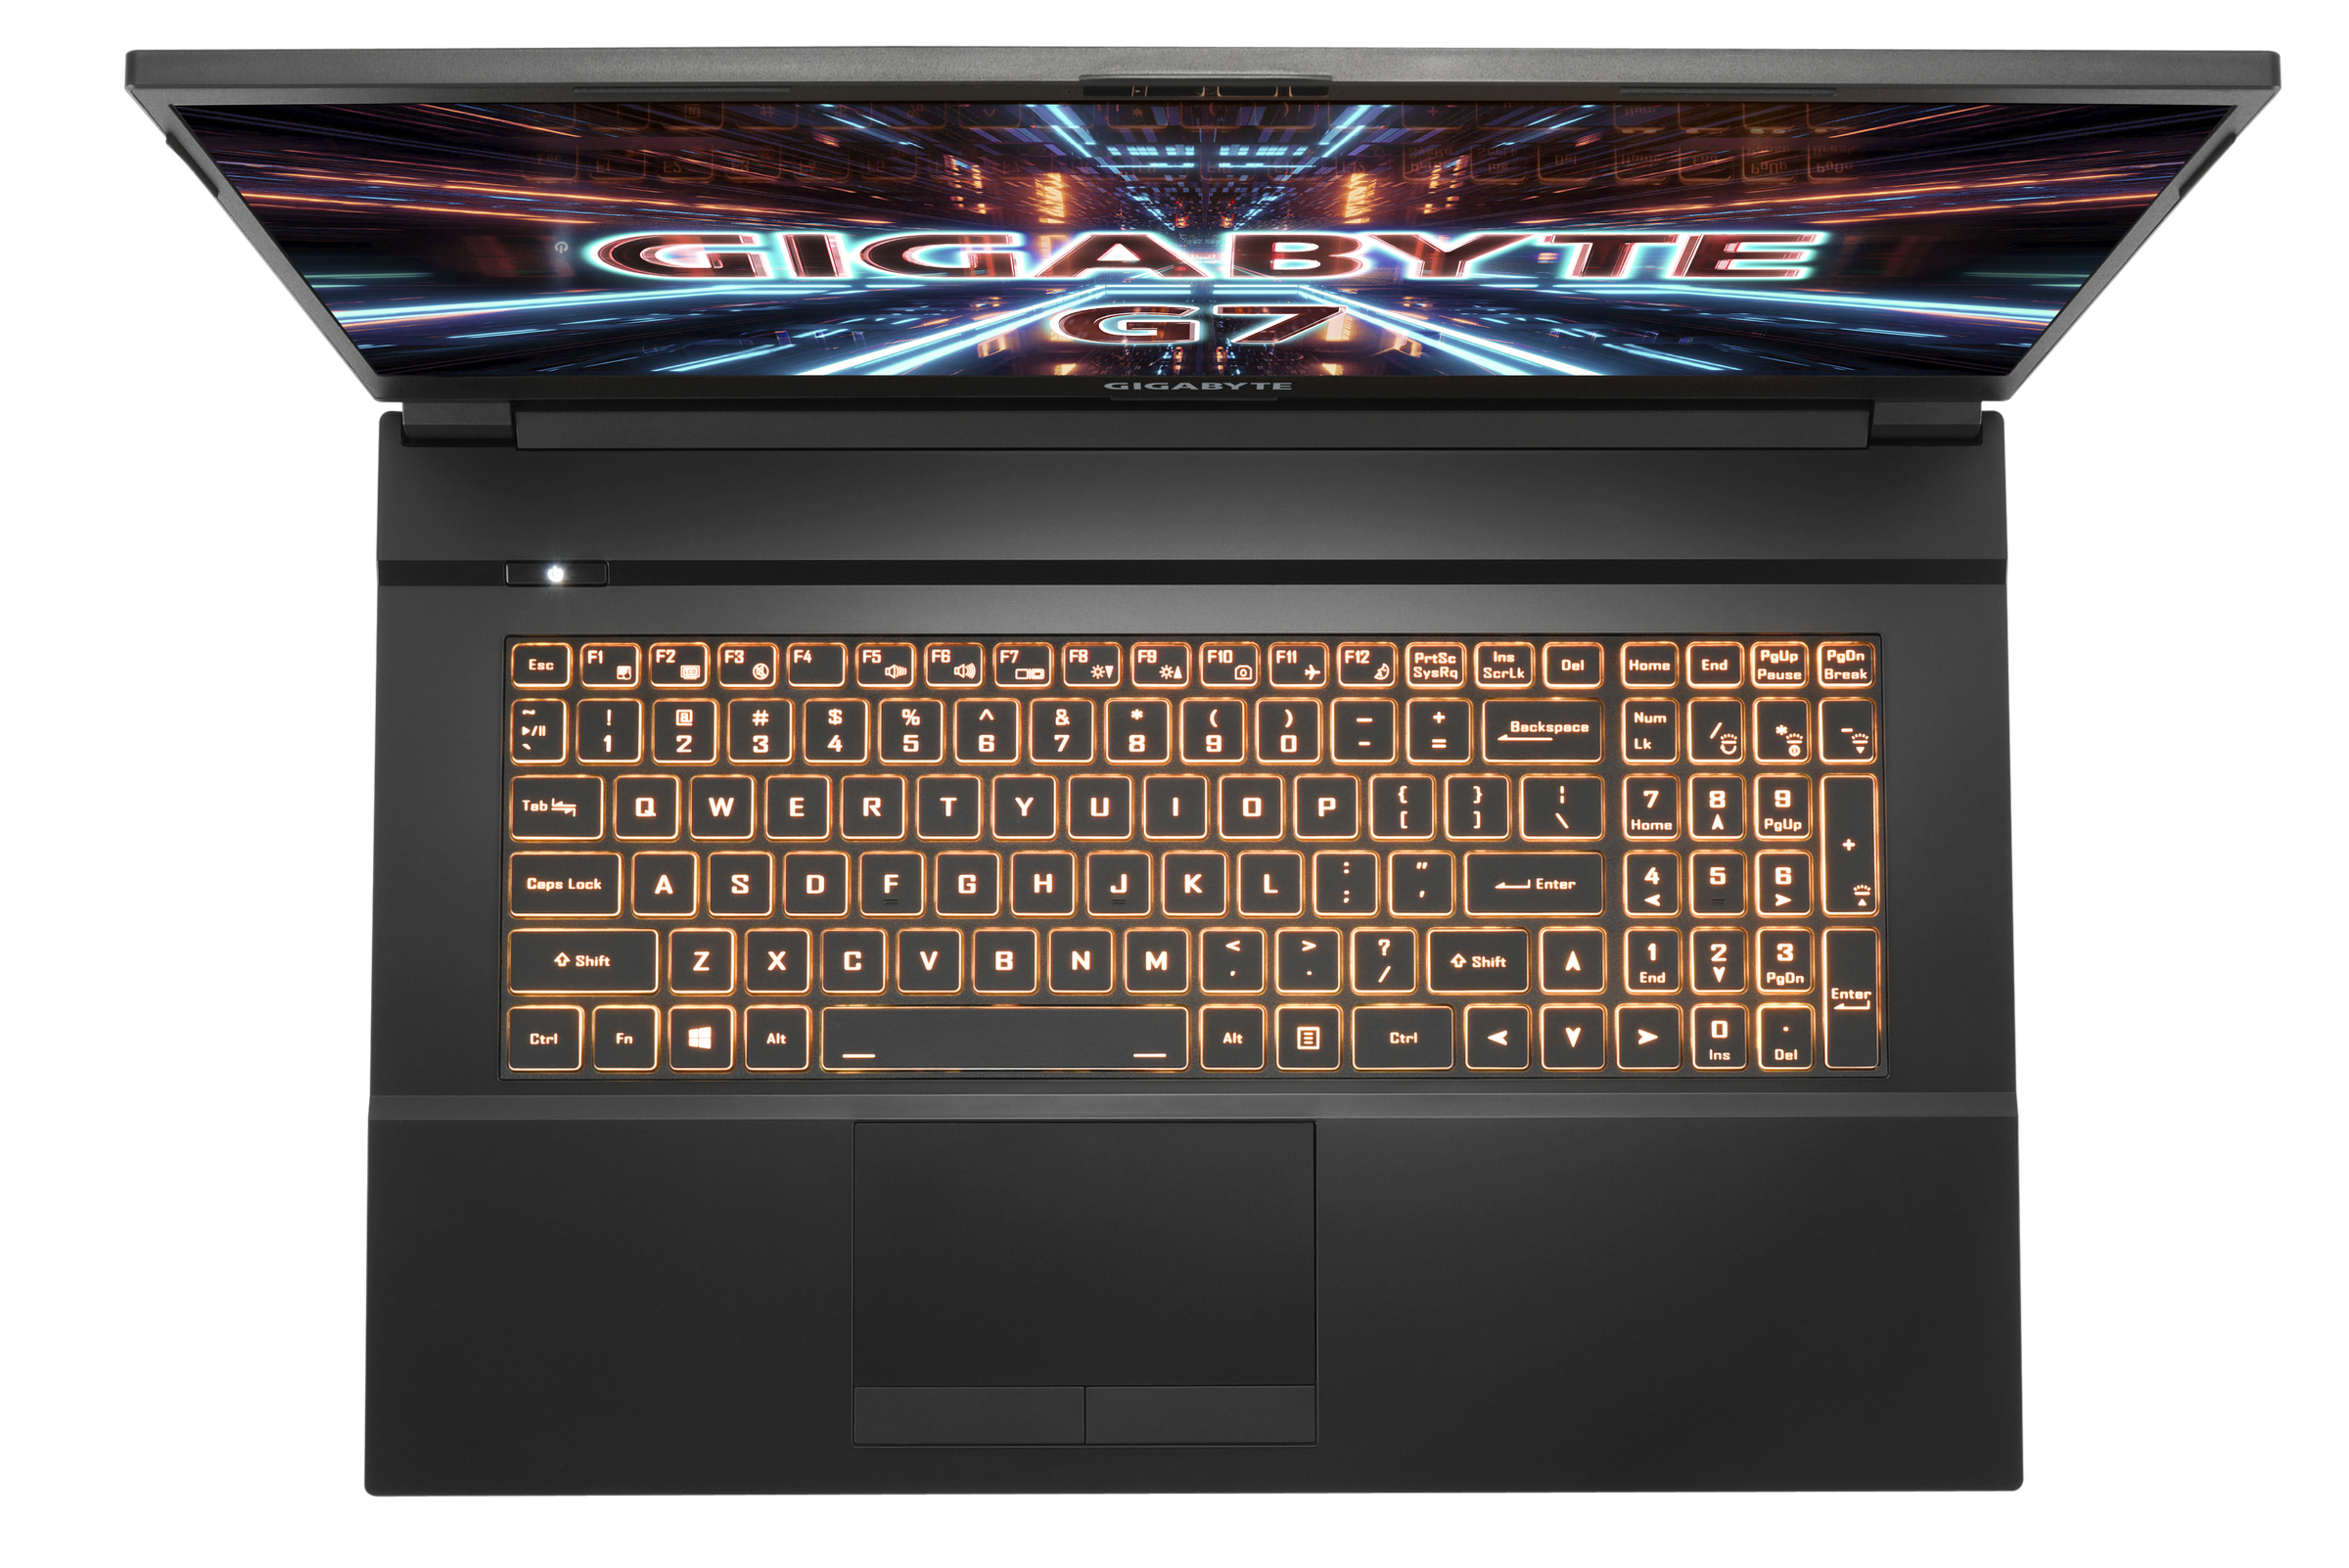 The Gigabyte G7 keyboard seen from above with orange backlighting.